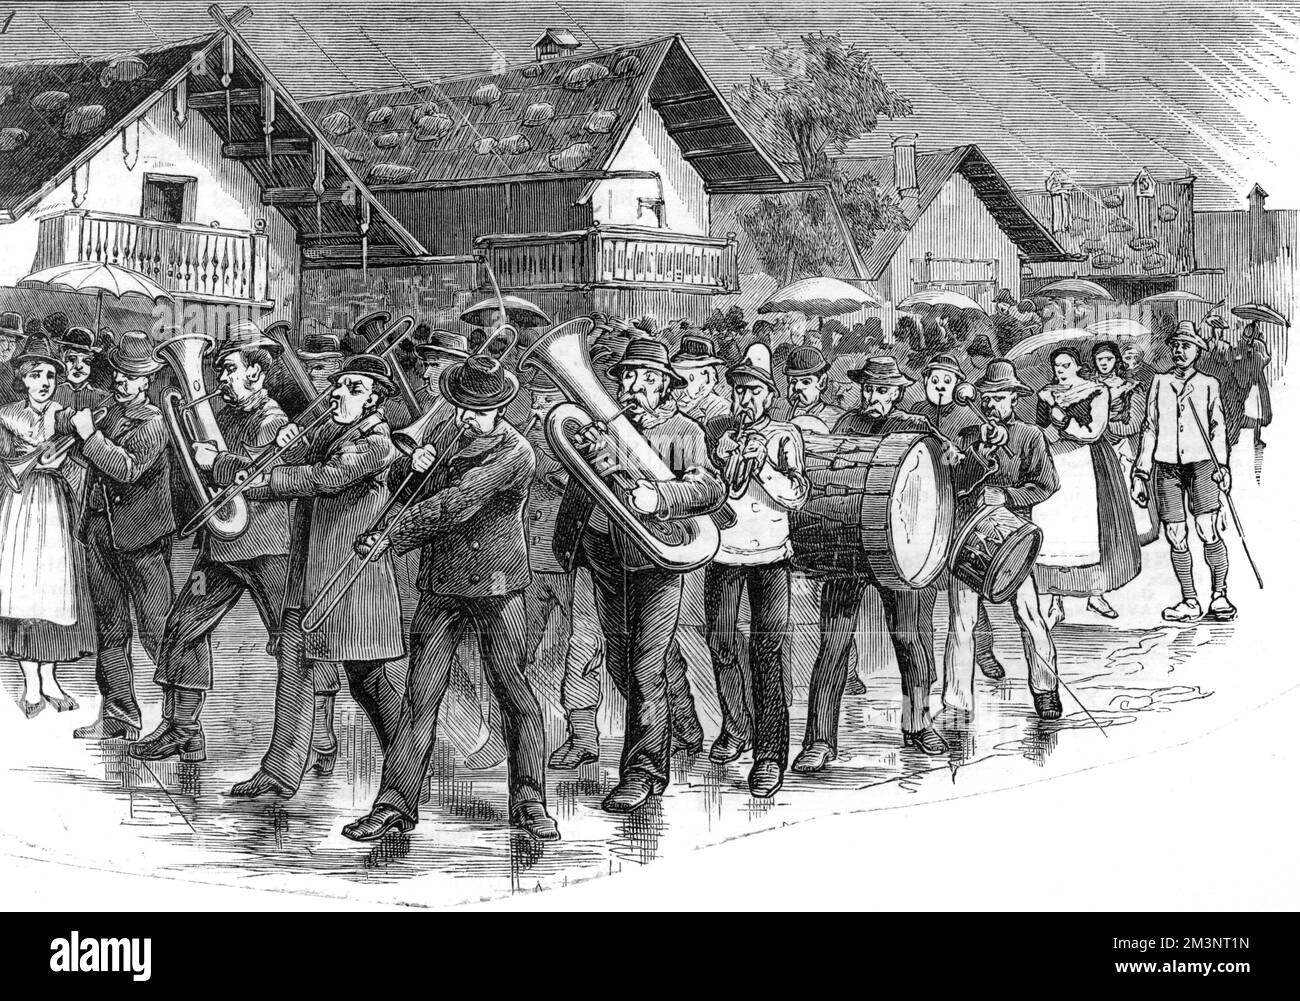 A marching band braves the rain at Oberammergau, Germany.     Date: 1880 Stock Photo